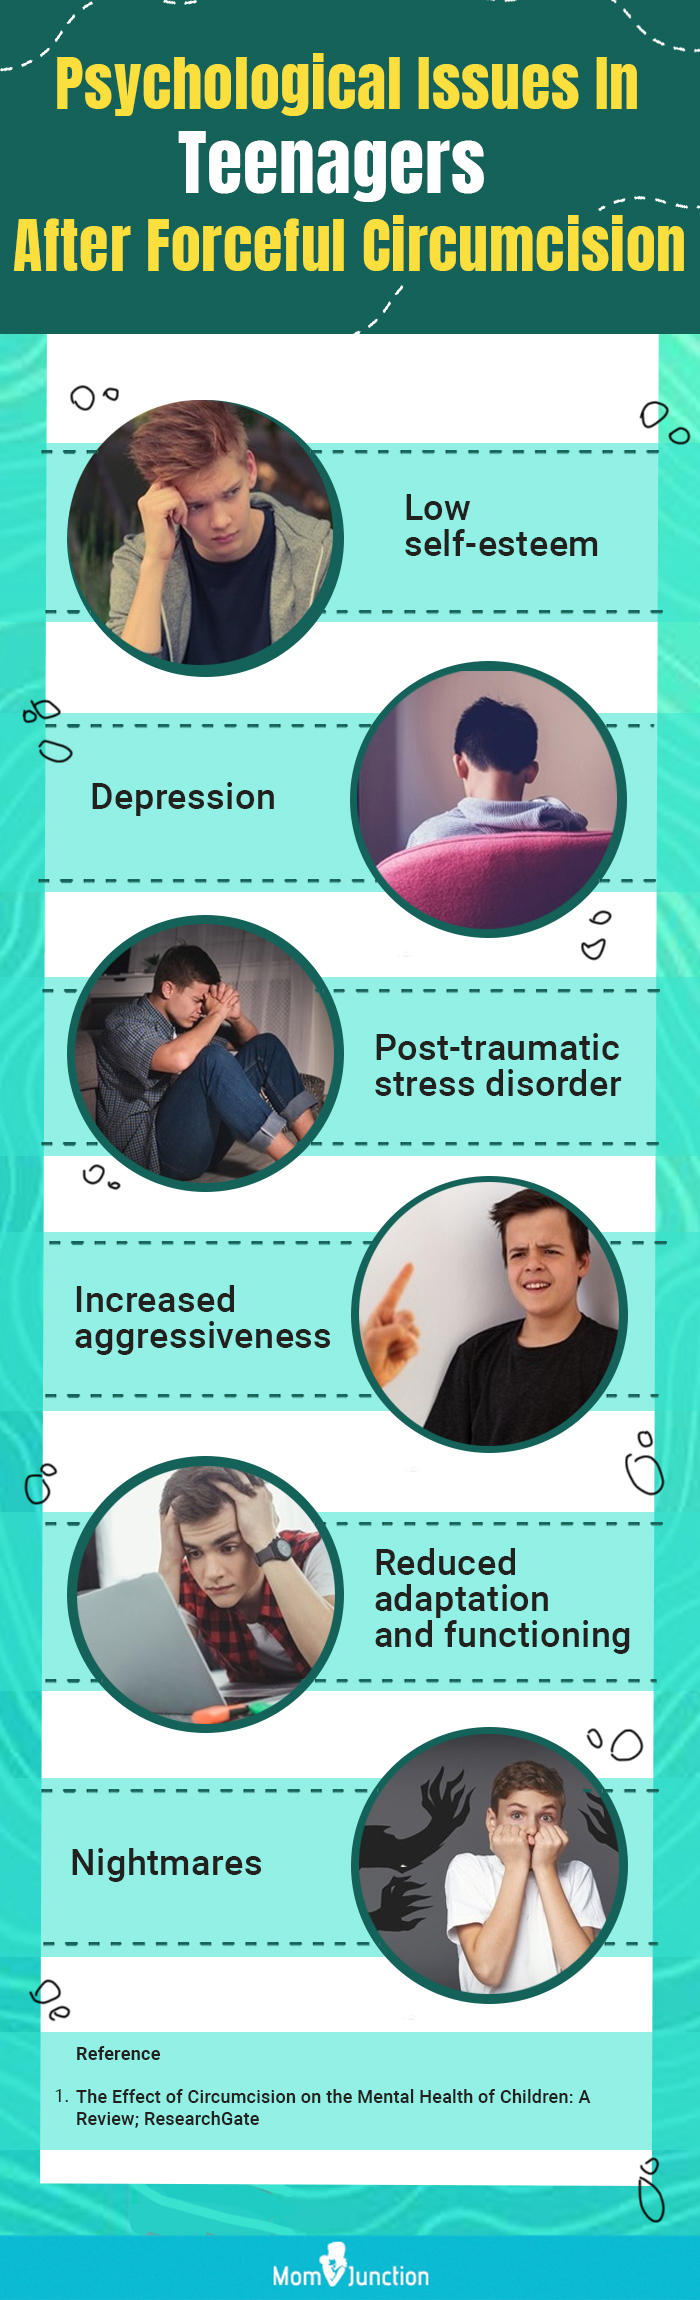 effects of forceful circumcision in teens (infographic)